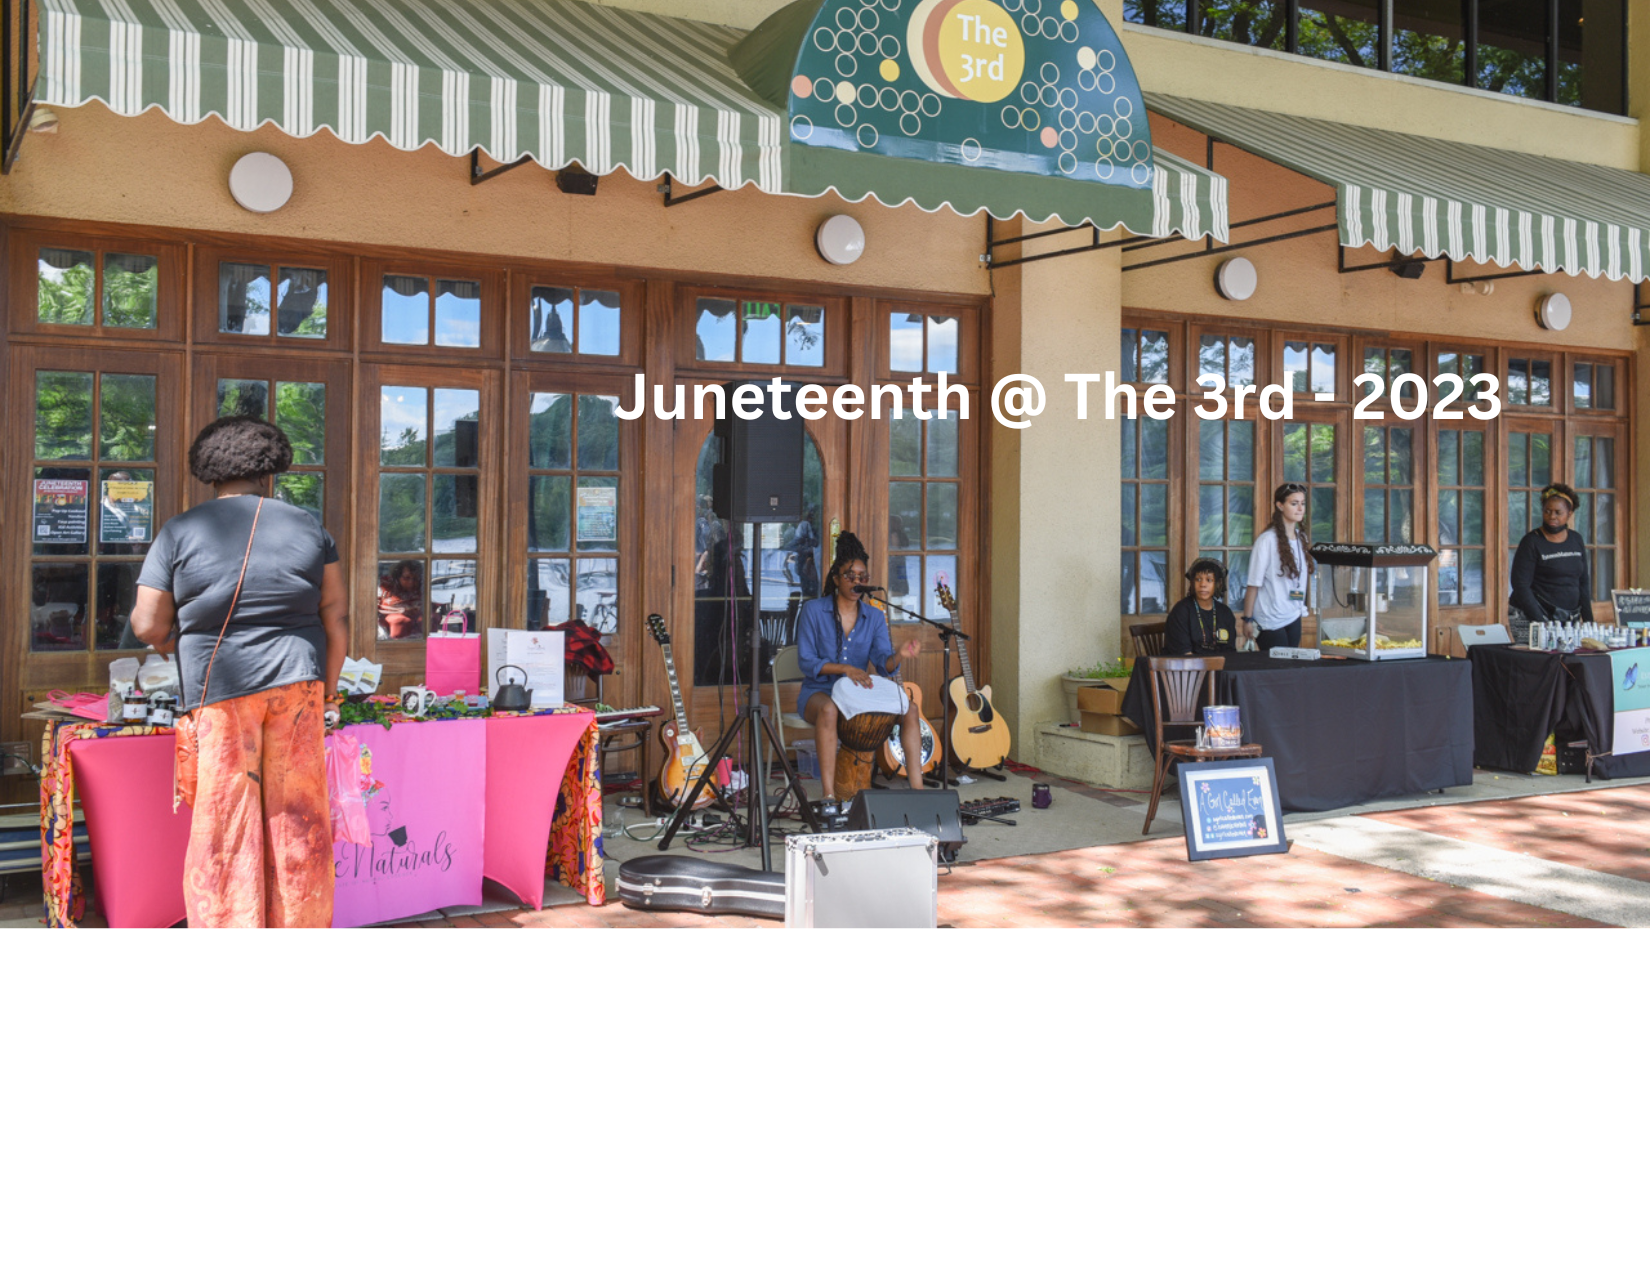 Juneteenth @ The 3rd - 20233.png